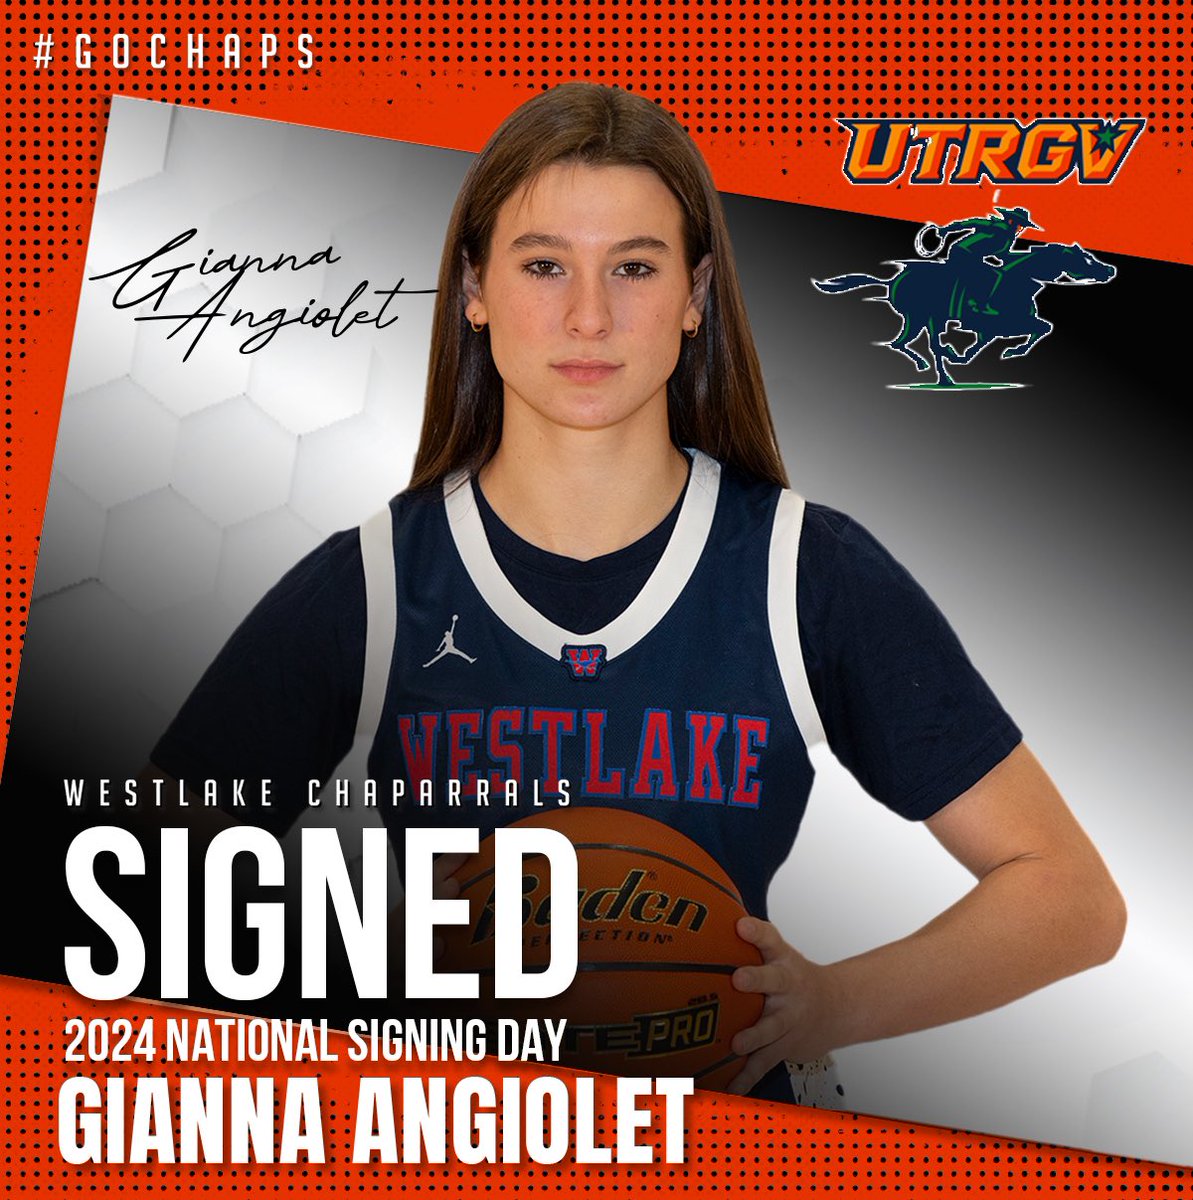 Gianna Angiolet will take her academic and basketball talents to the University of Texas Rio Grande Valley. Congratulations, Gianna. #GoChaps #RallyTheValley